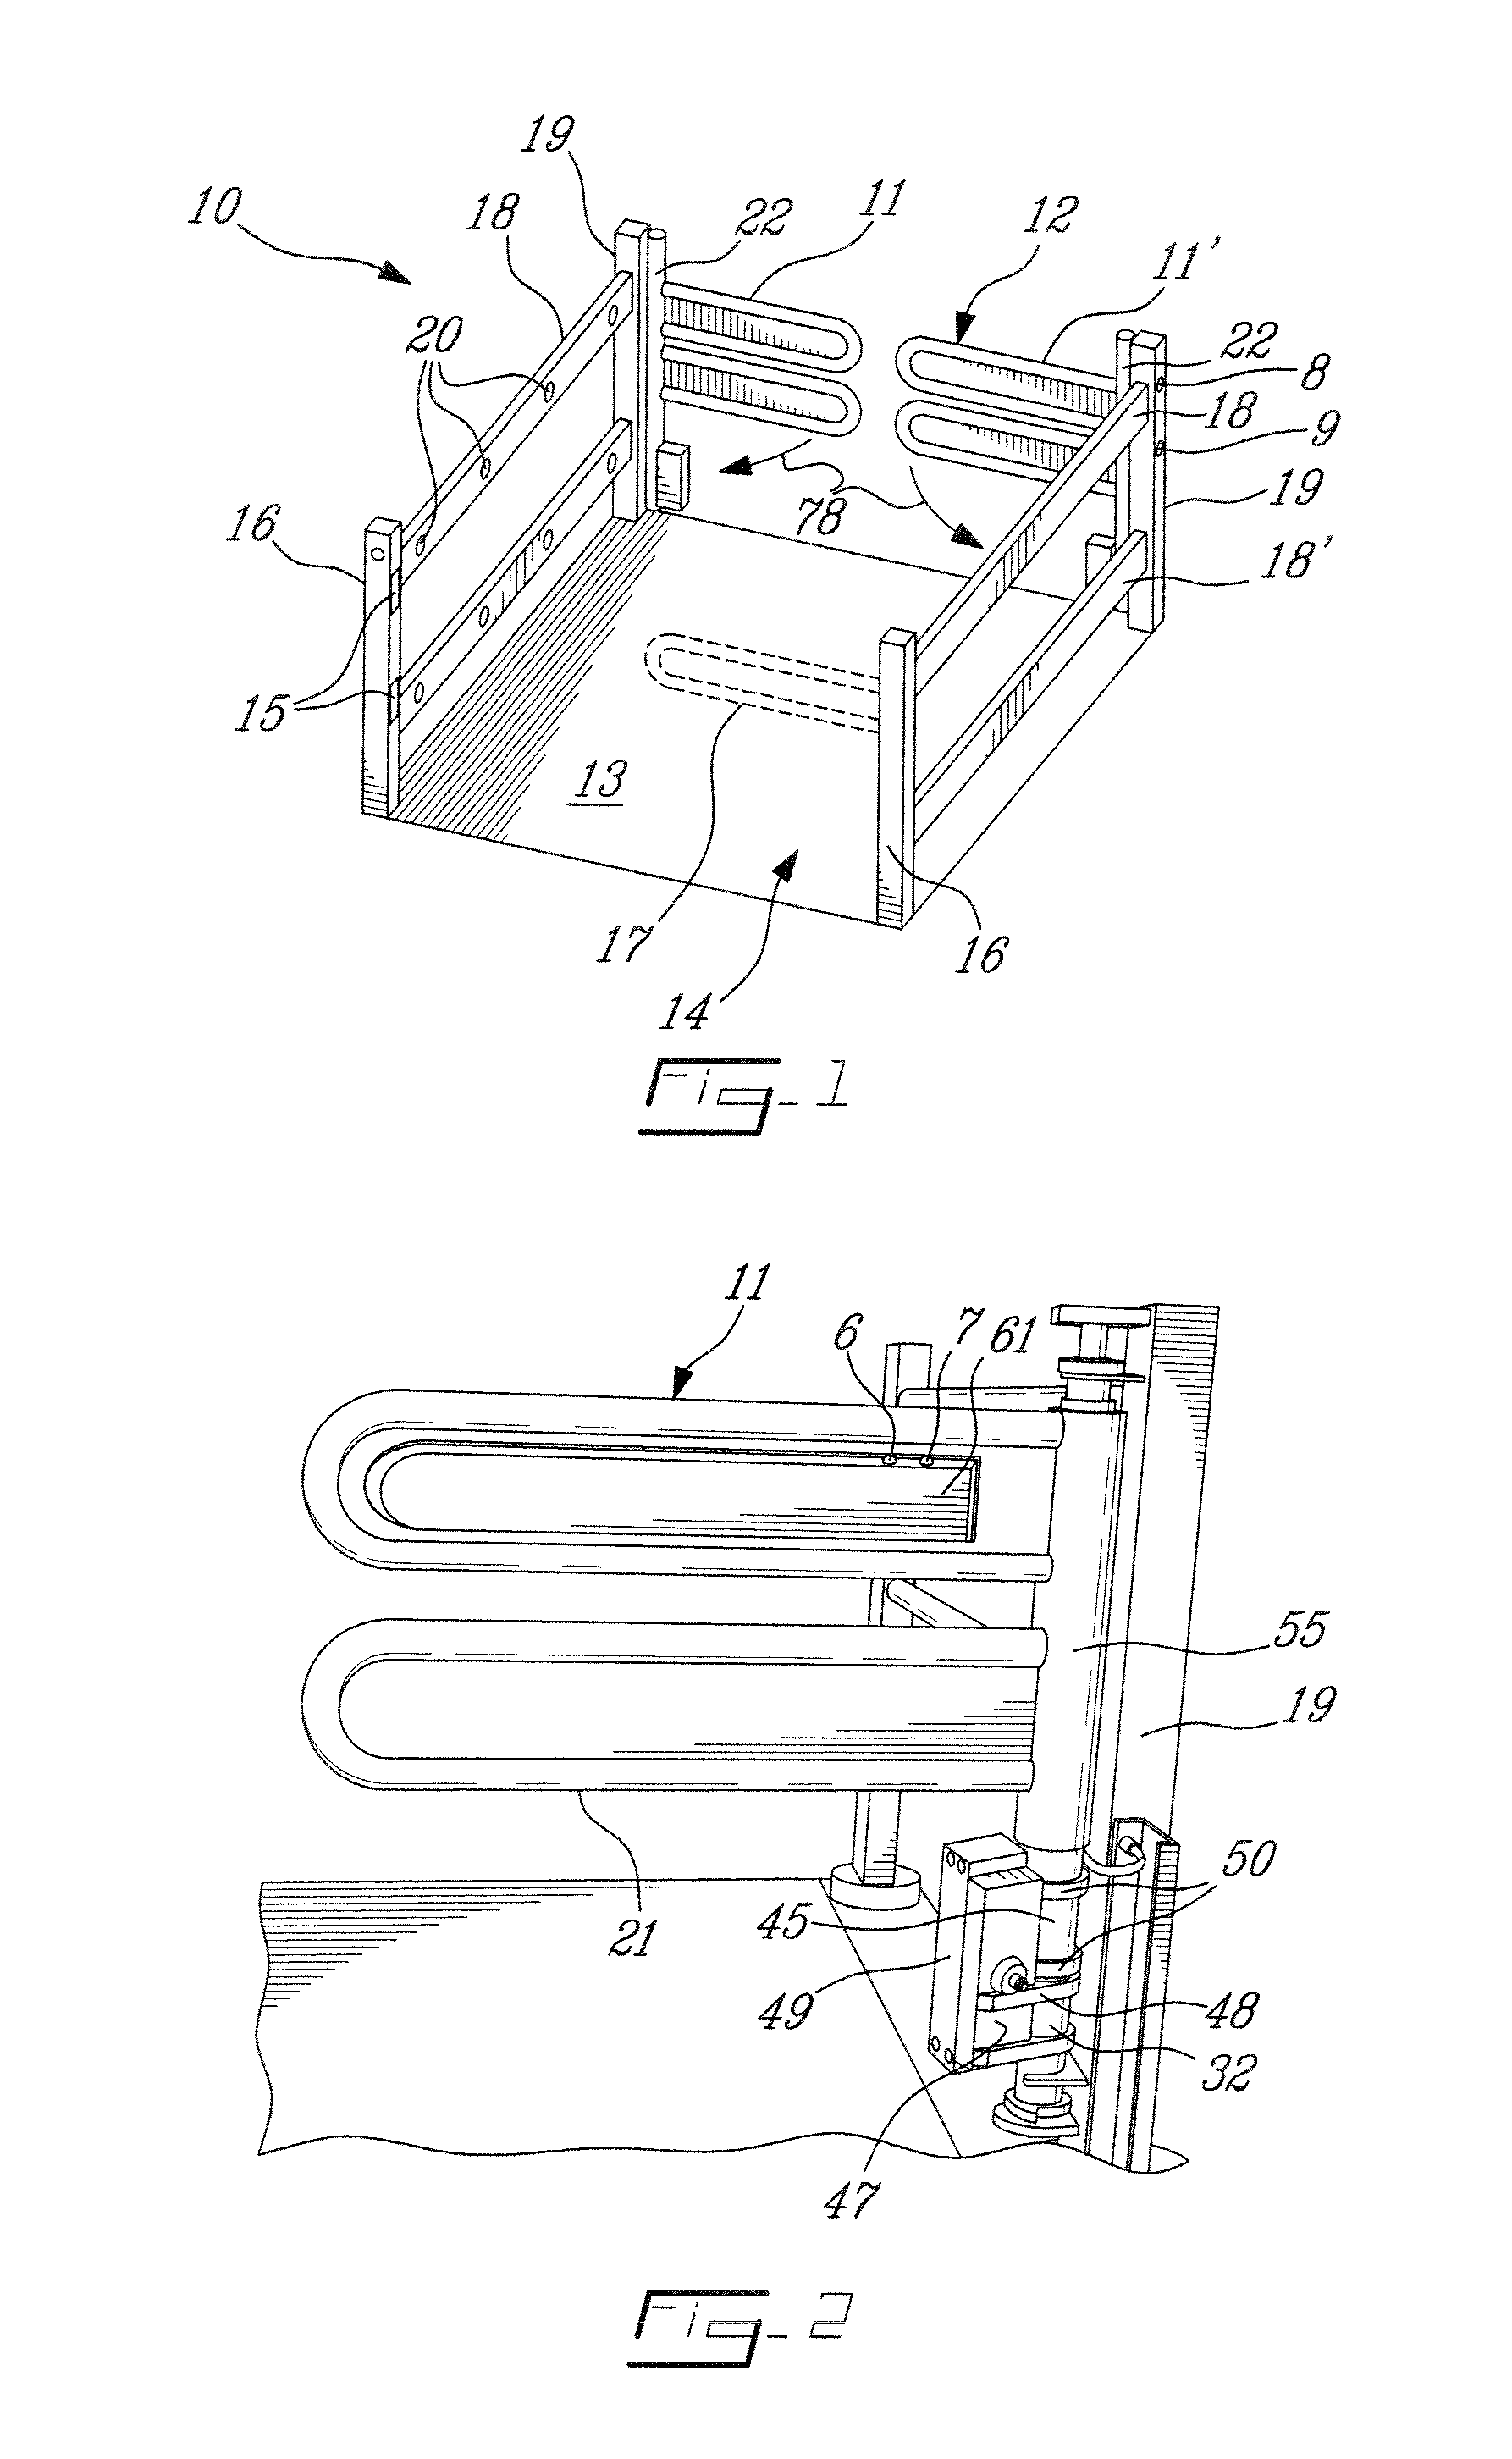 Controlled gate system with electromagnetic locking mechanism